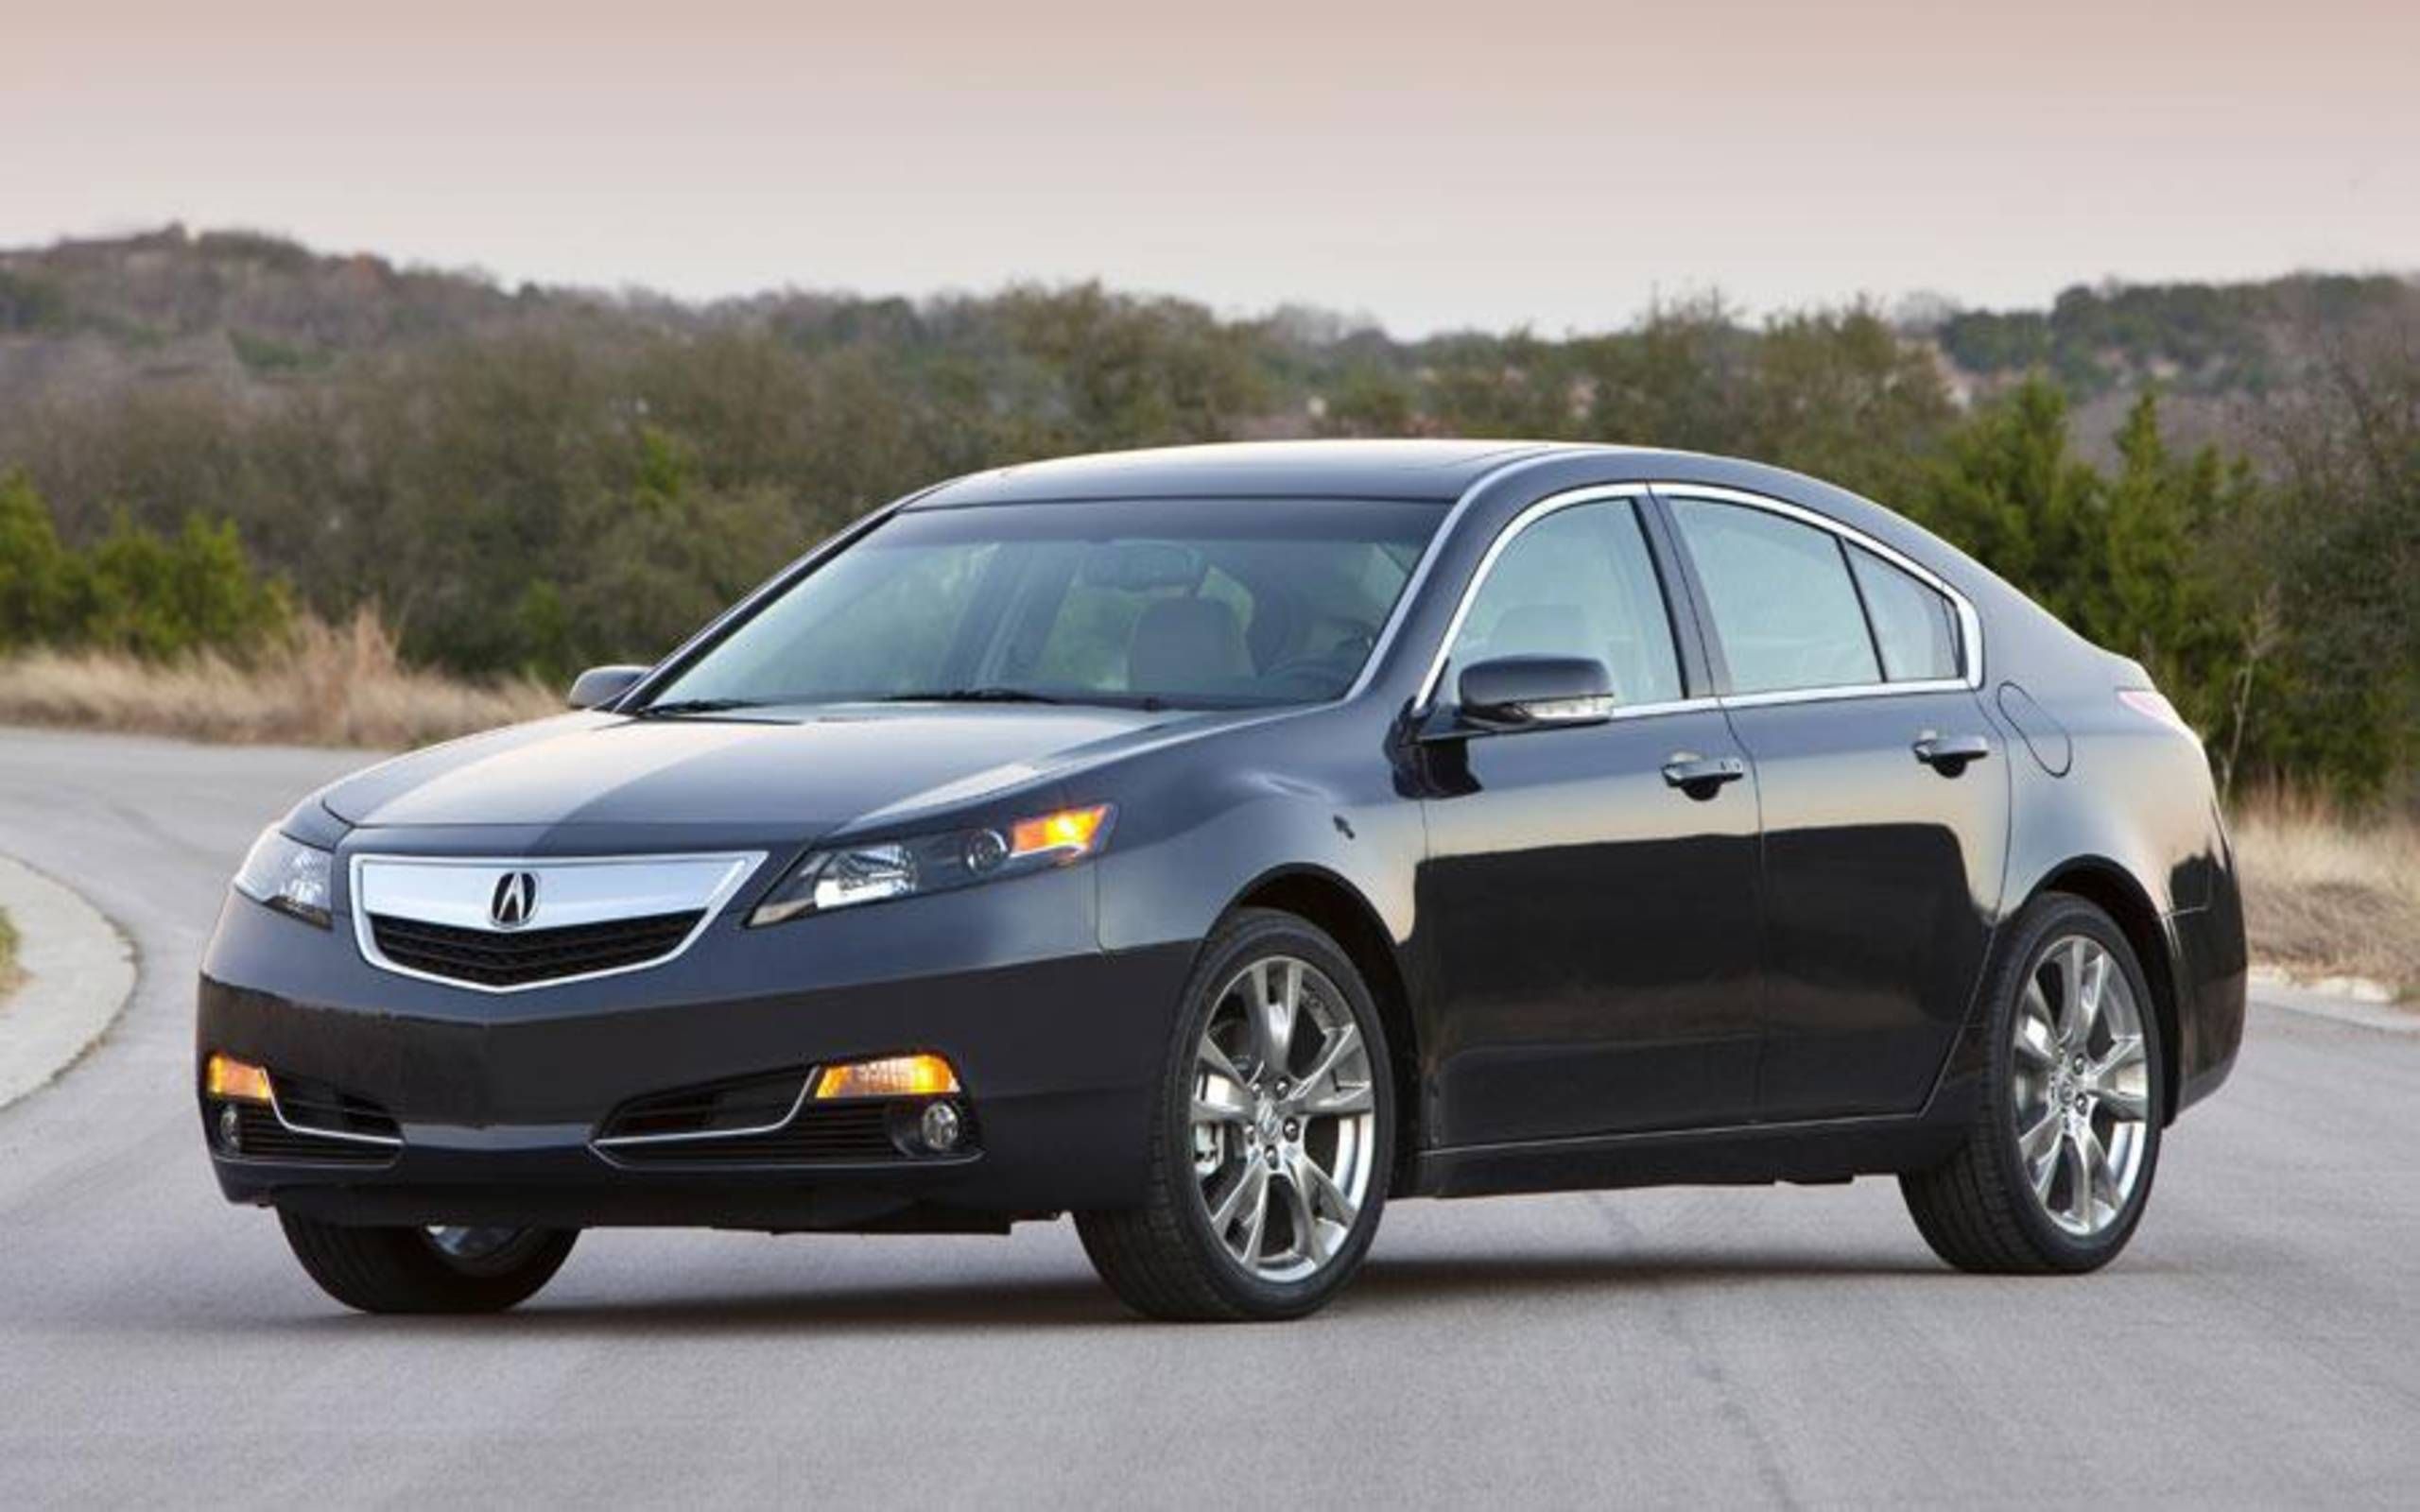 2013 Acura TL SH-AWD Advance review notes